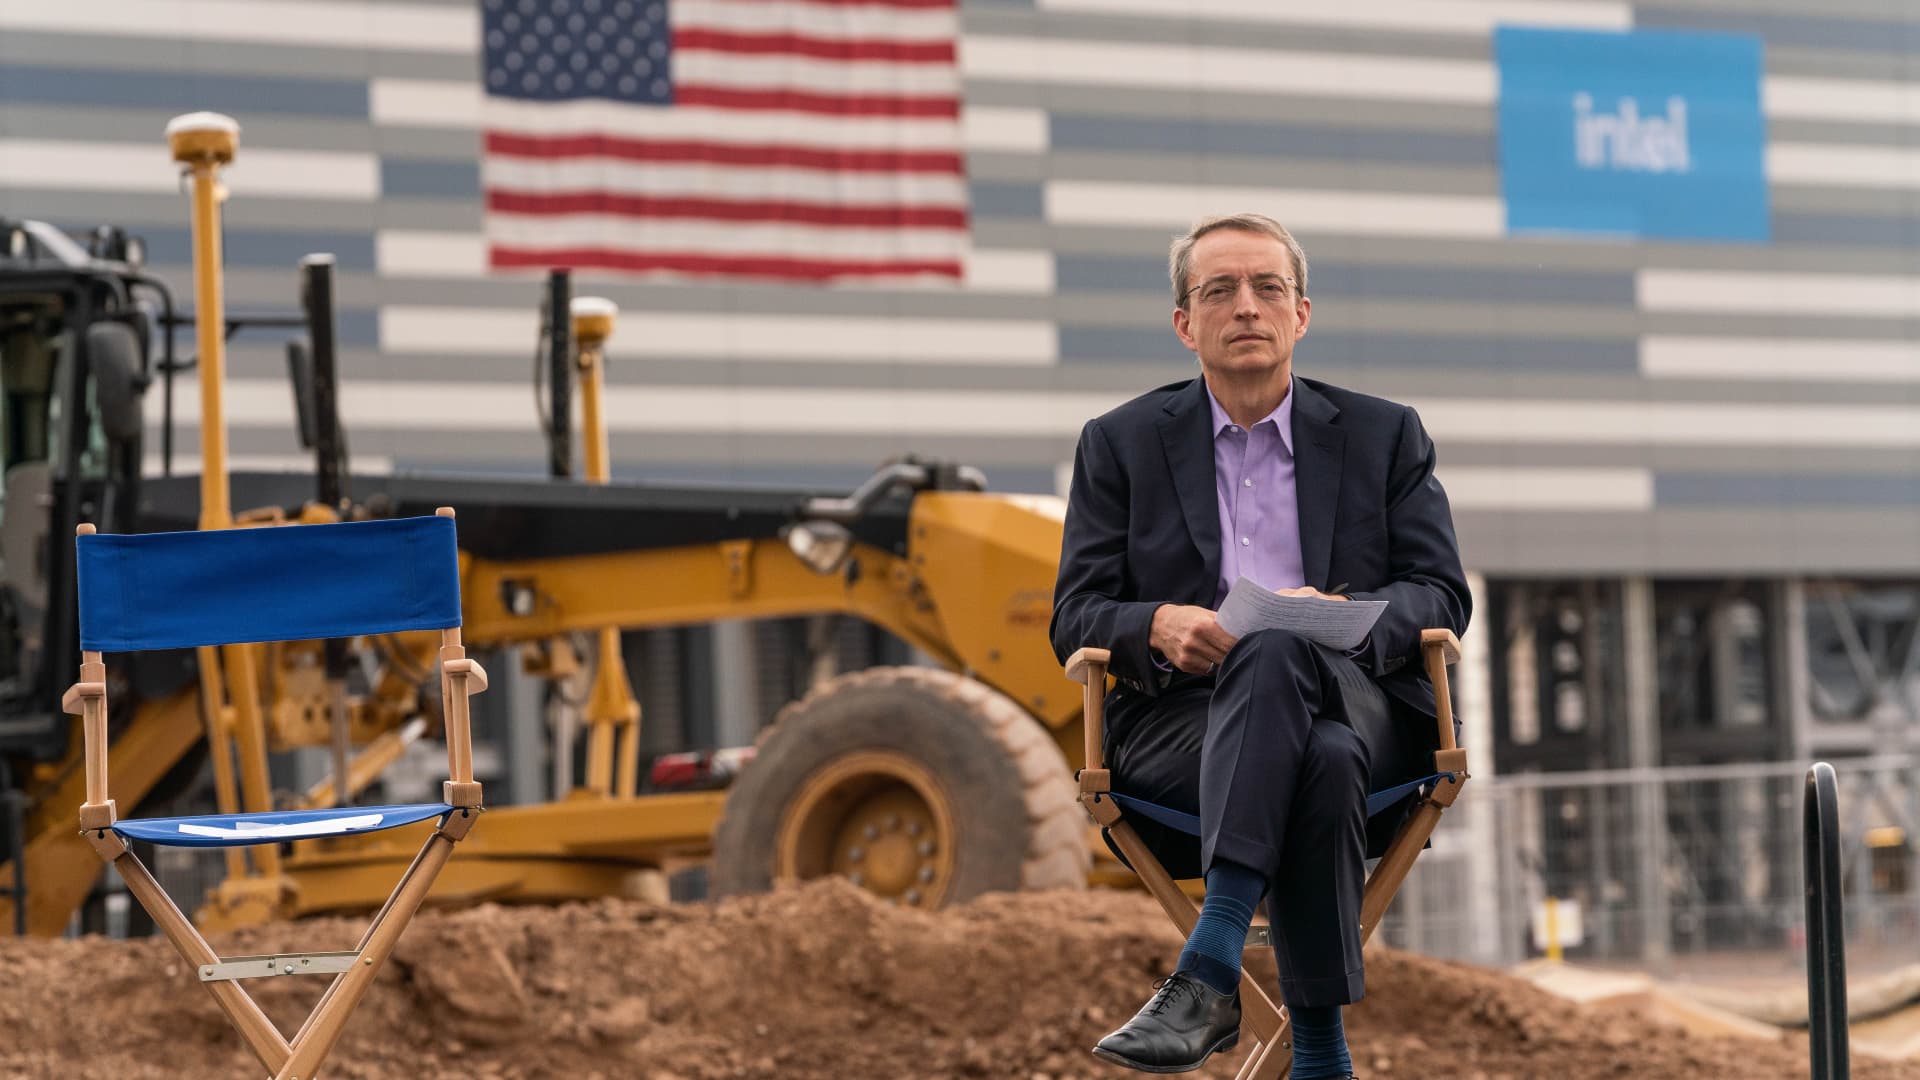 Intel CEO Pat Gelsinger at the groundbreaking of two new chip fabrication plants in Chandler, Arizona, on Friday, Sept. 24, 2021.